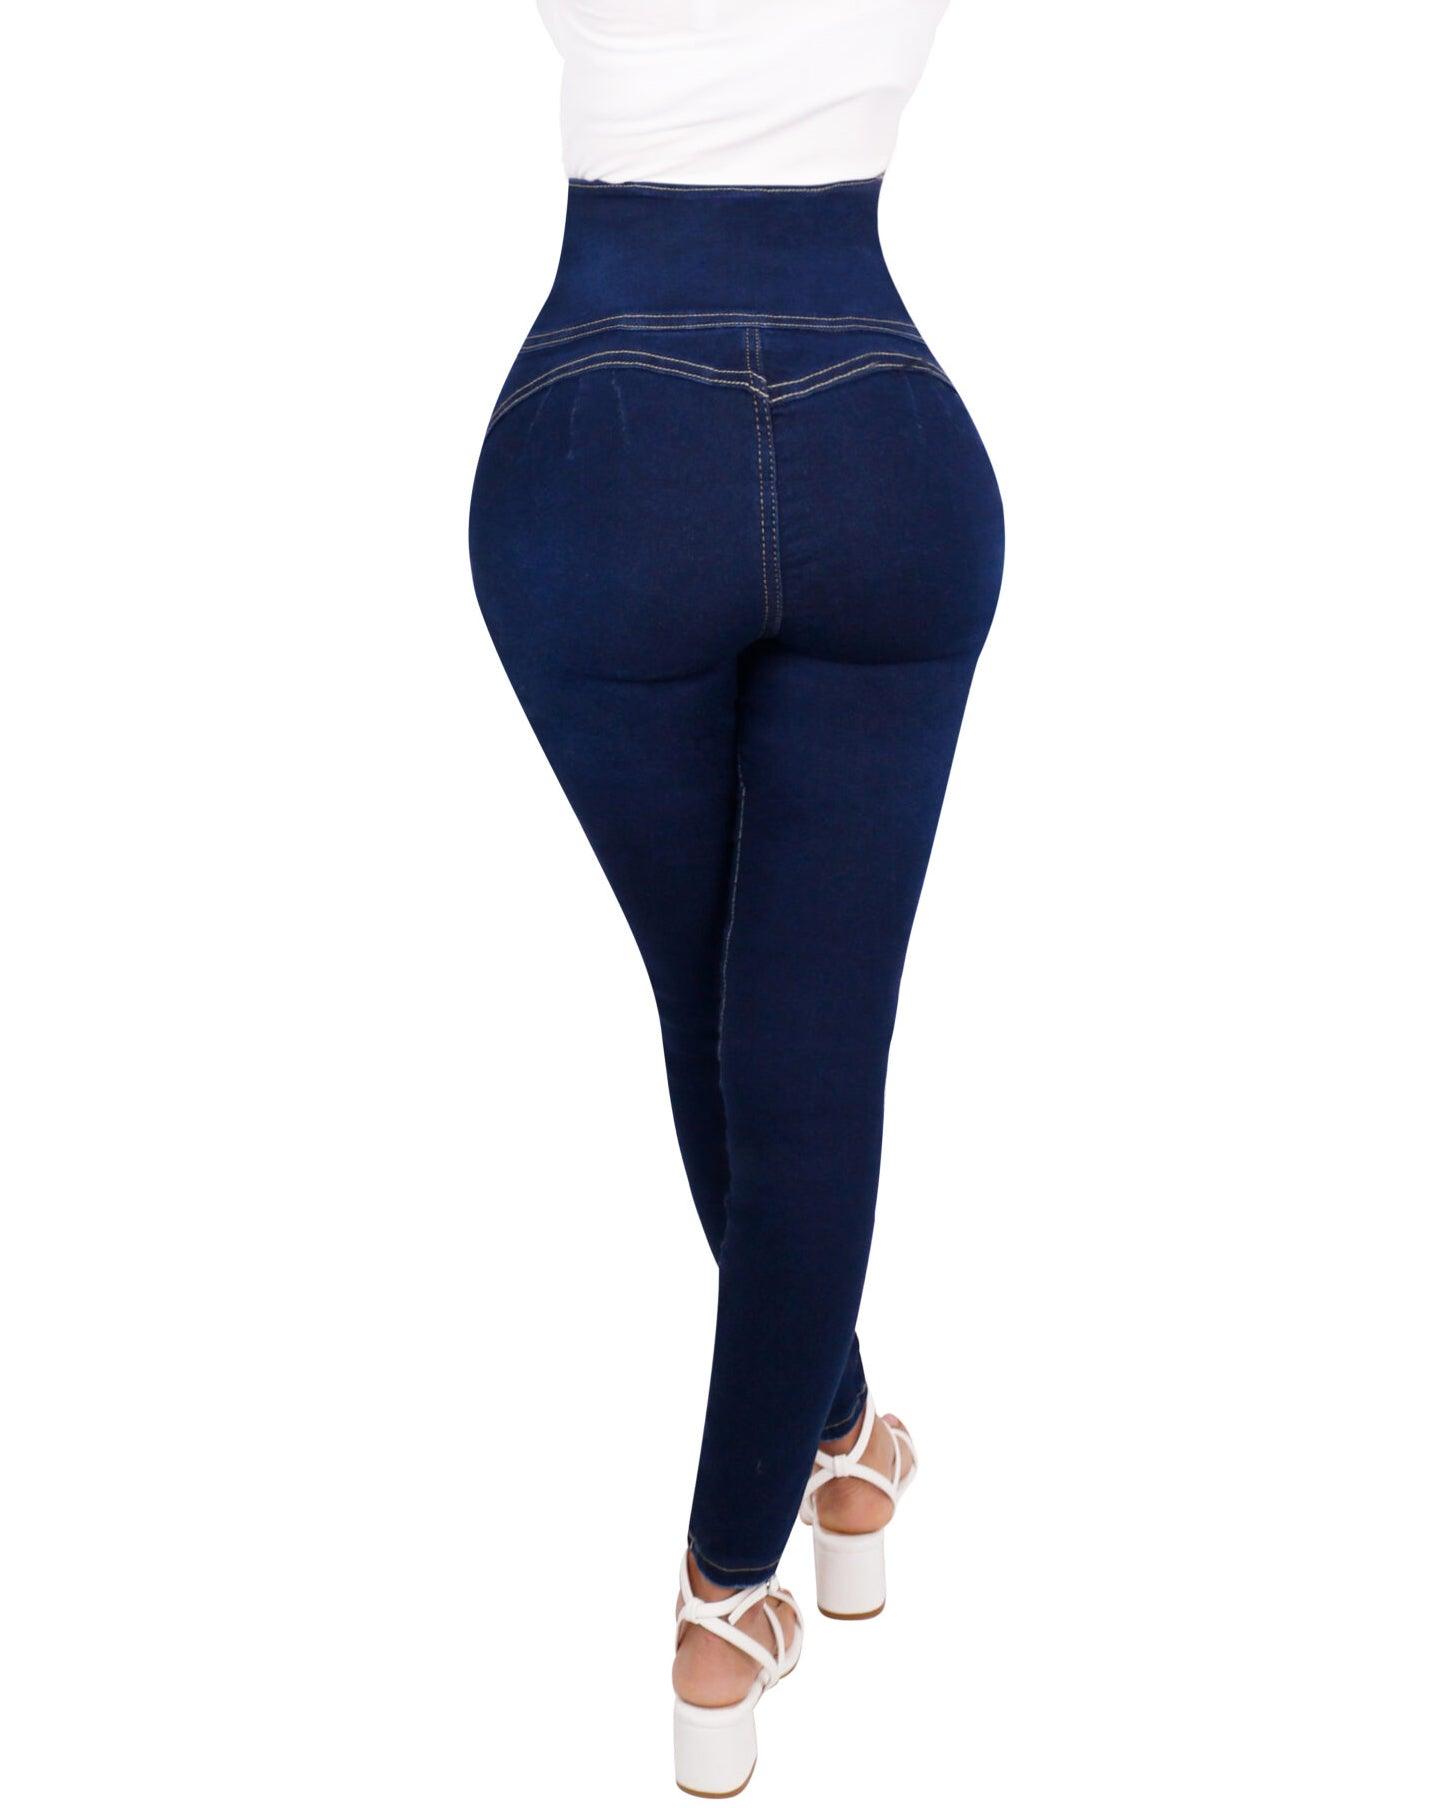 Wishe Butt Lifting Jeans Waist Jeans Curvy High Stretchy